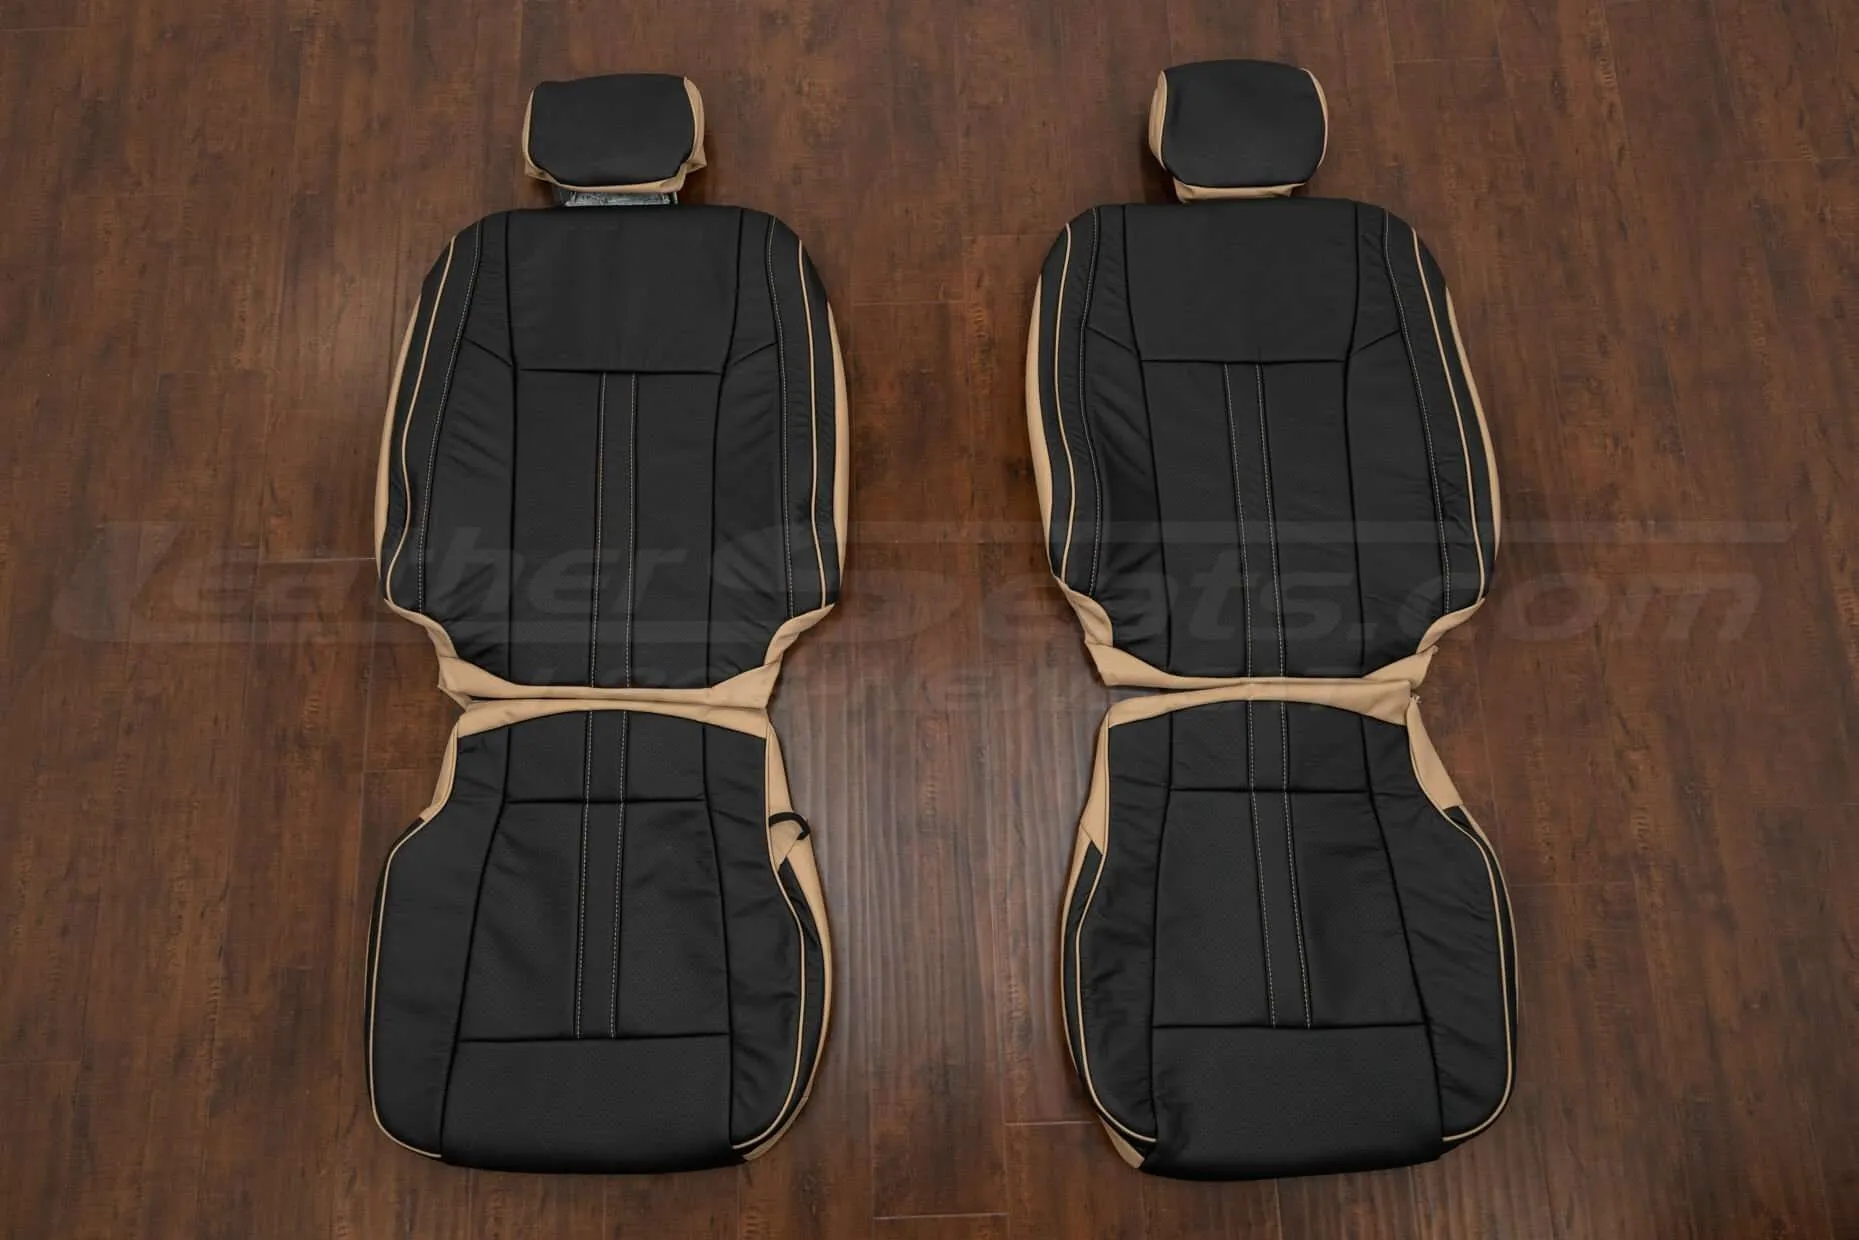 2019 Ford F-150 SuperCrew XLT Leather Seat Kit - Bisque/Black - Front seat upholstery